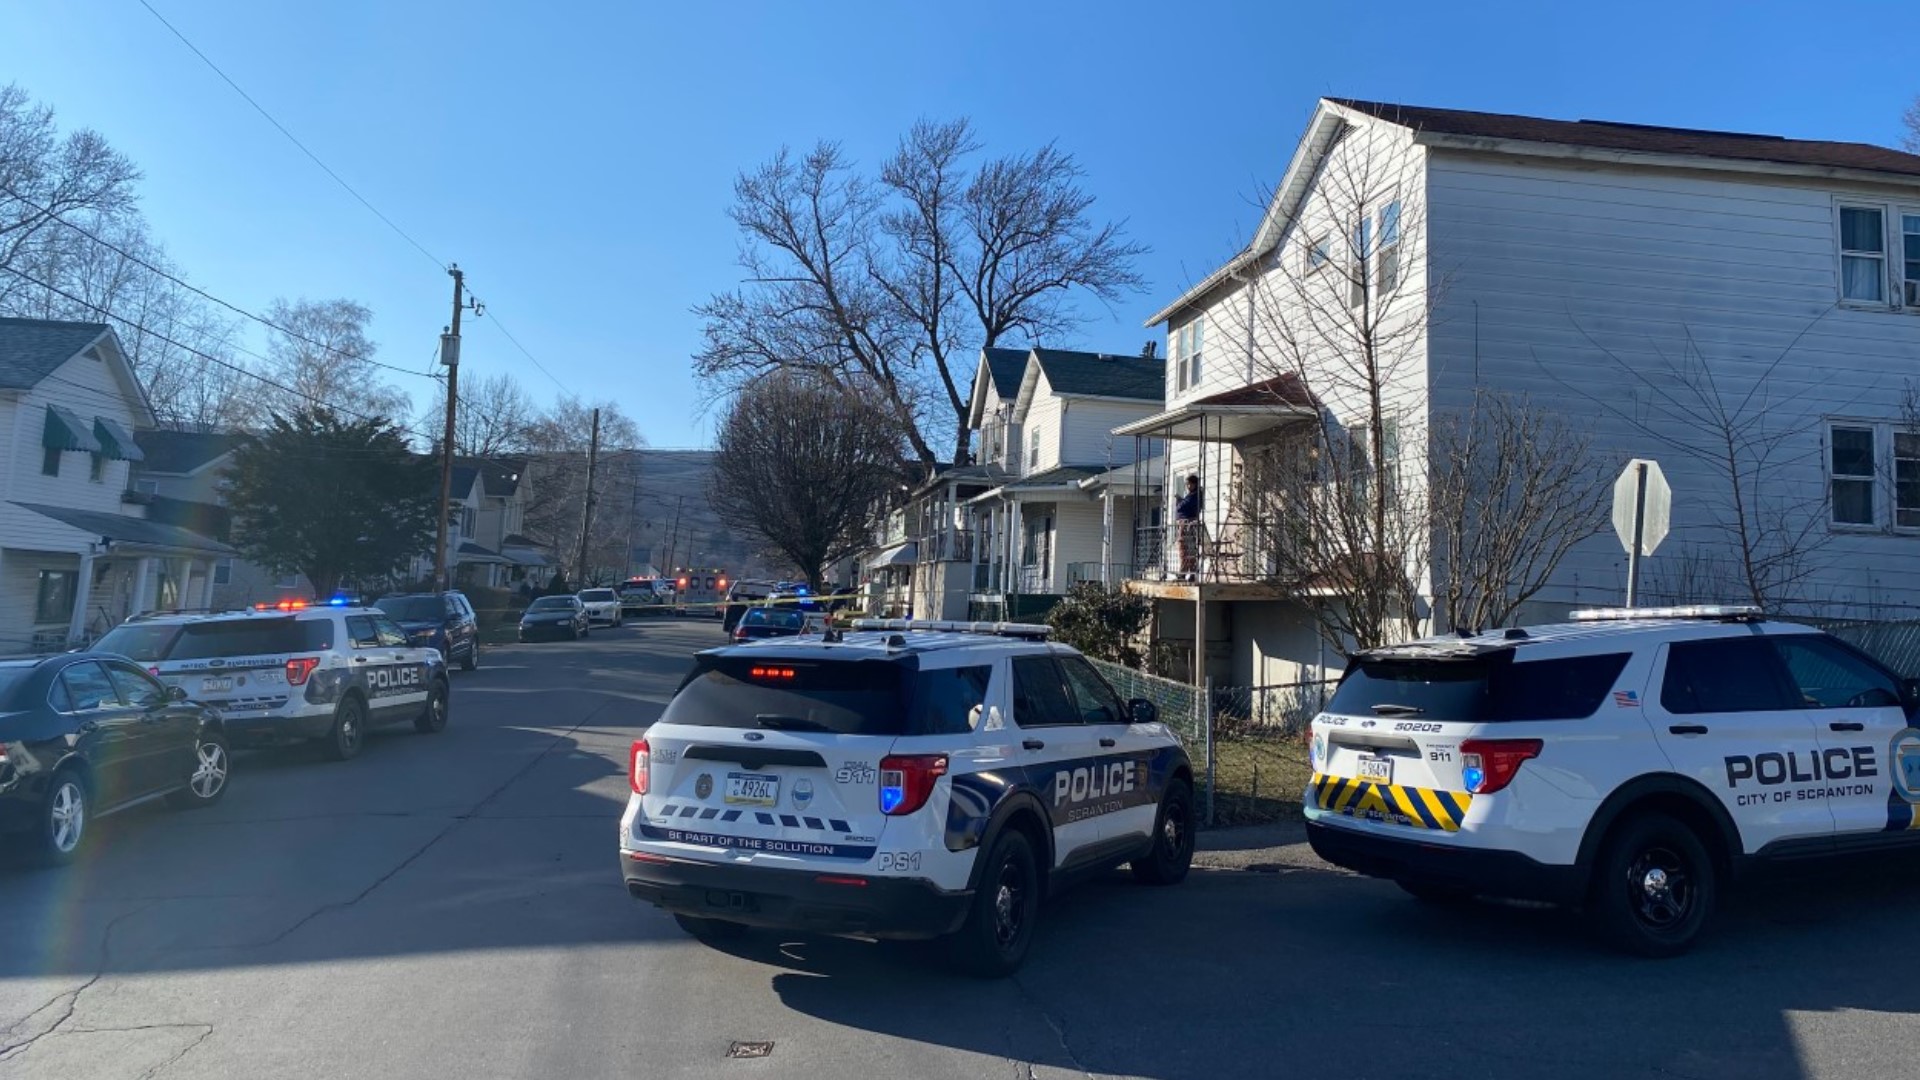 One person is dead, and two others are injured after a shooting along Price Street on Scranton's west side Monday afternoon.